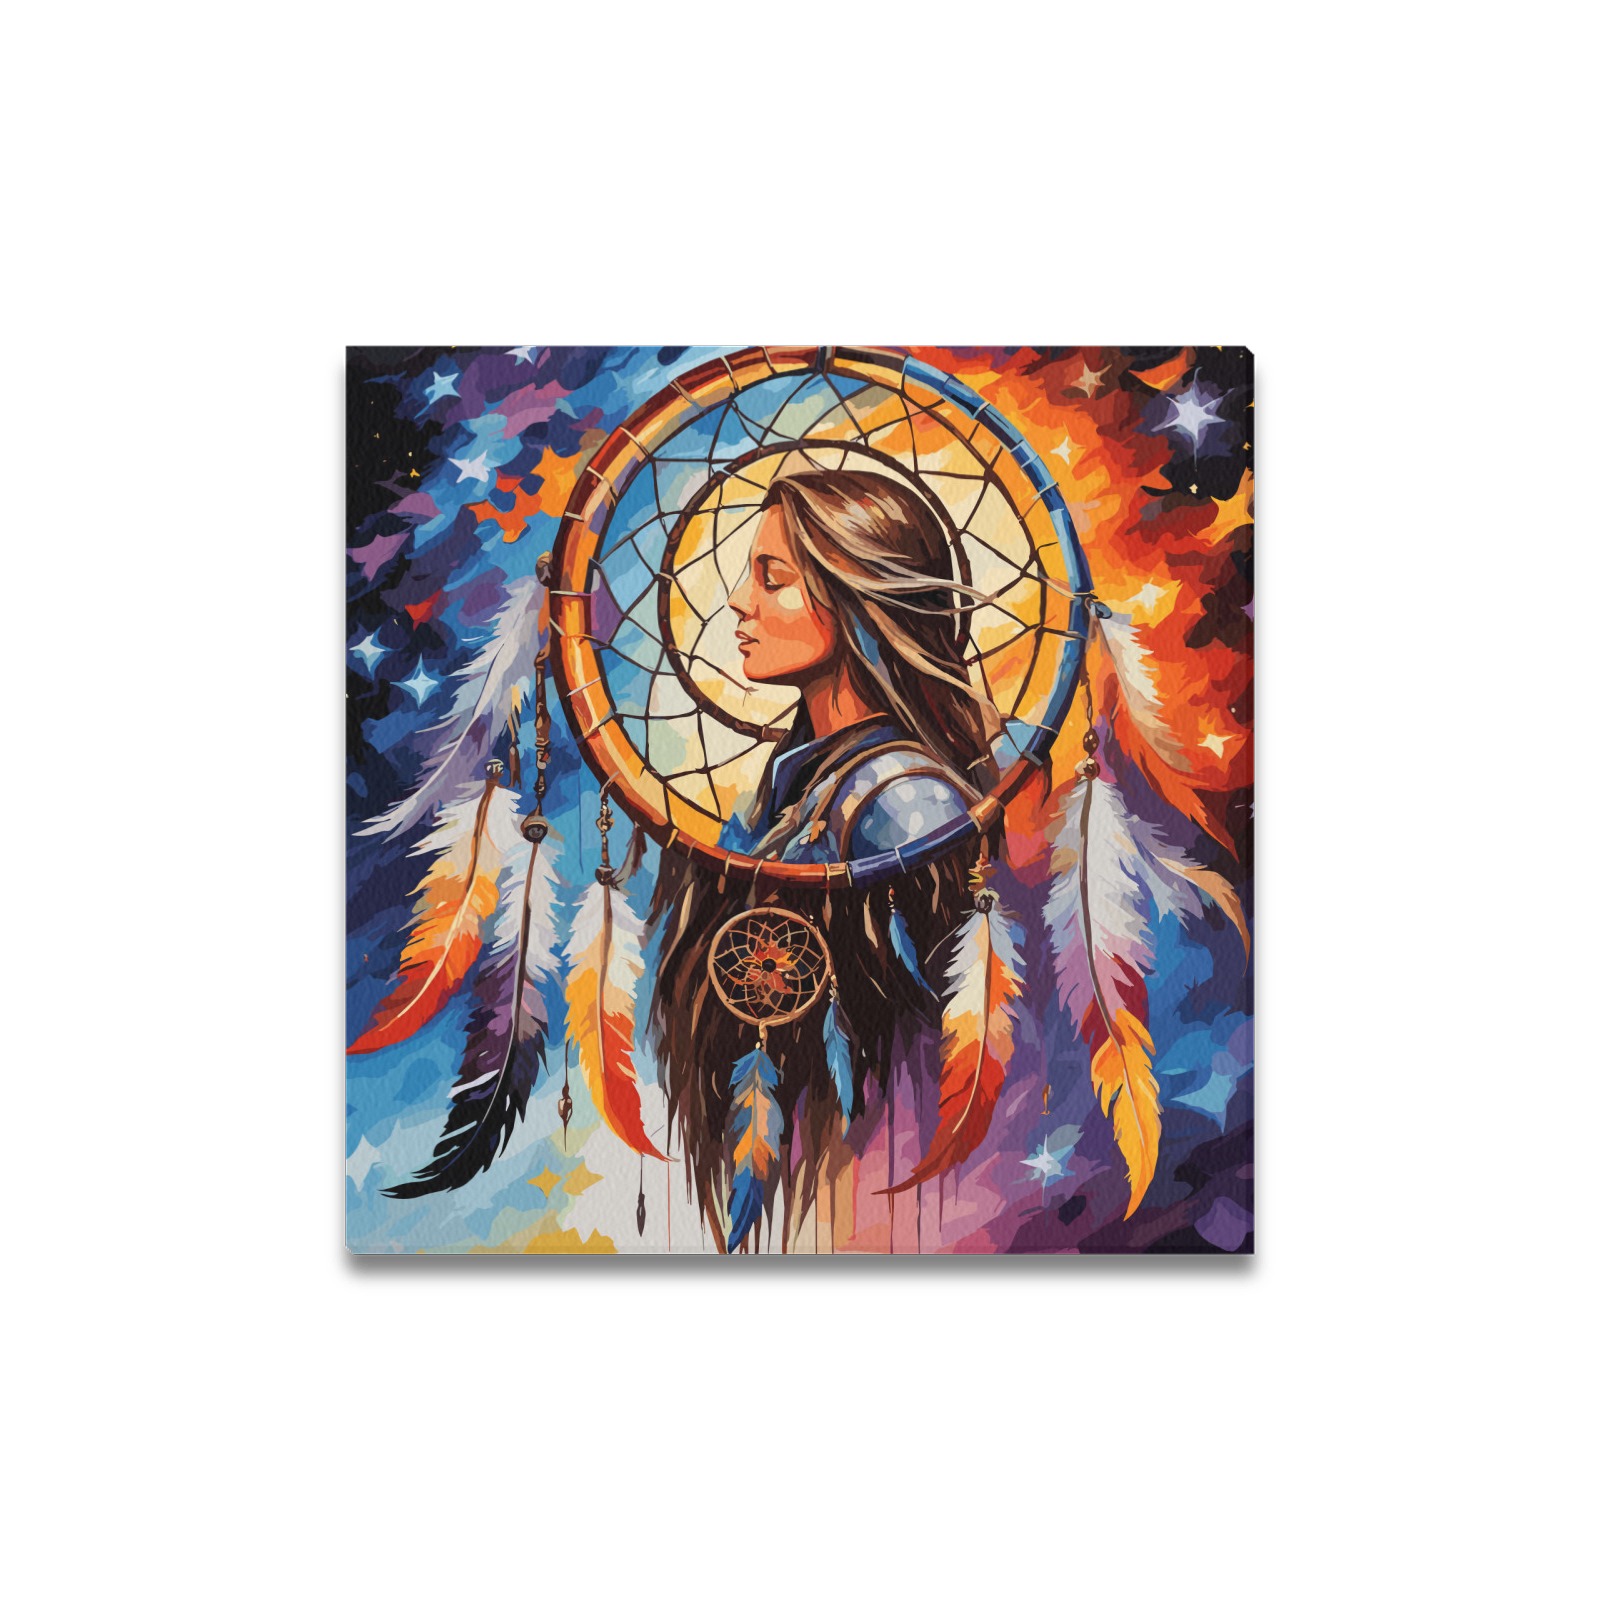 Dreaming woman inside a dreamcatcher colorful art. Upgraded Canvas Print 16"x16"